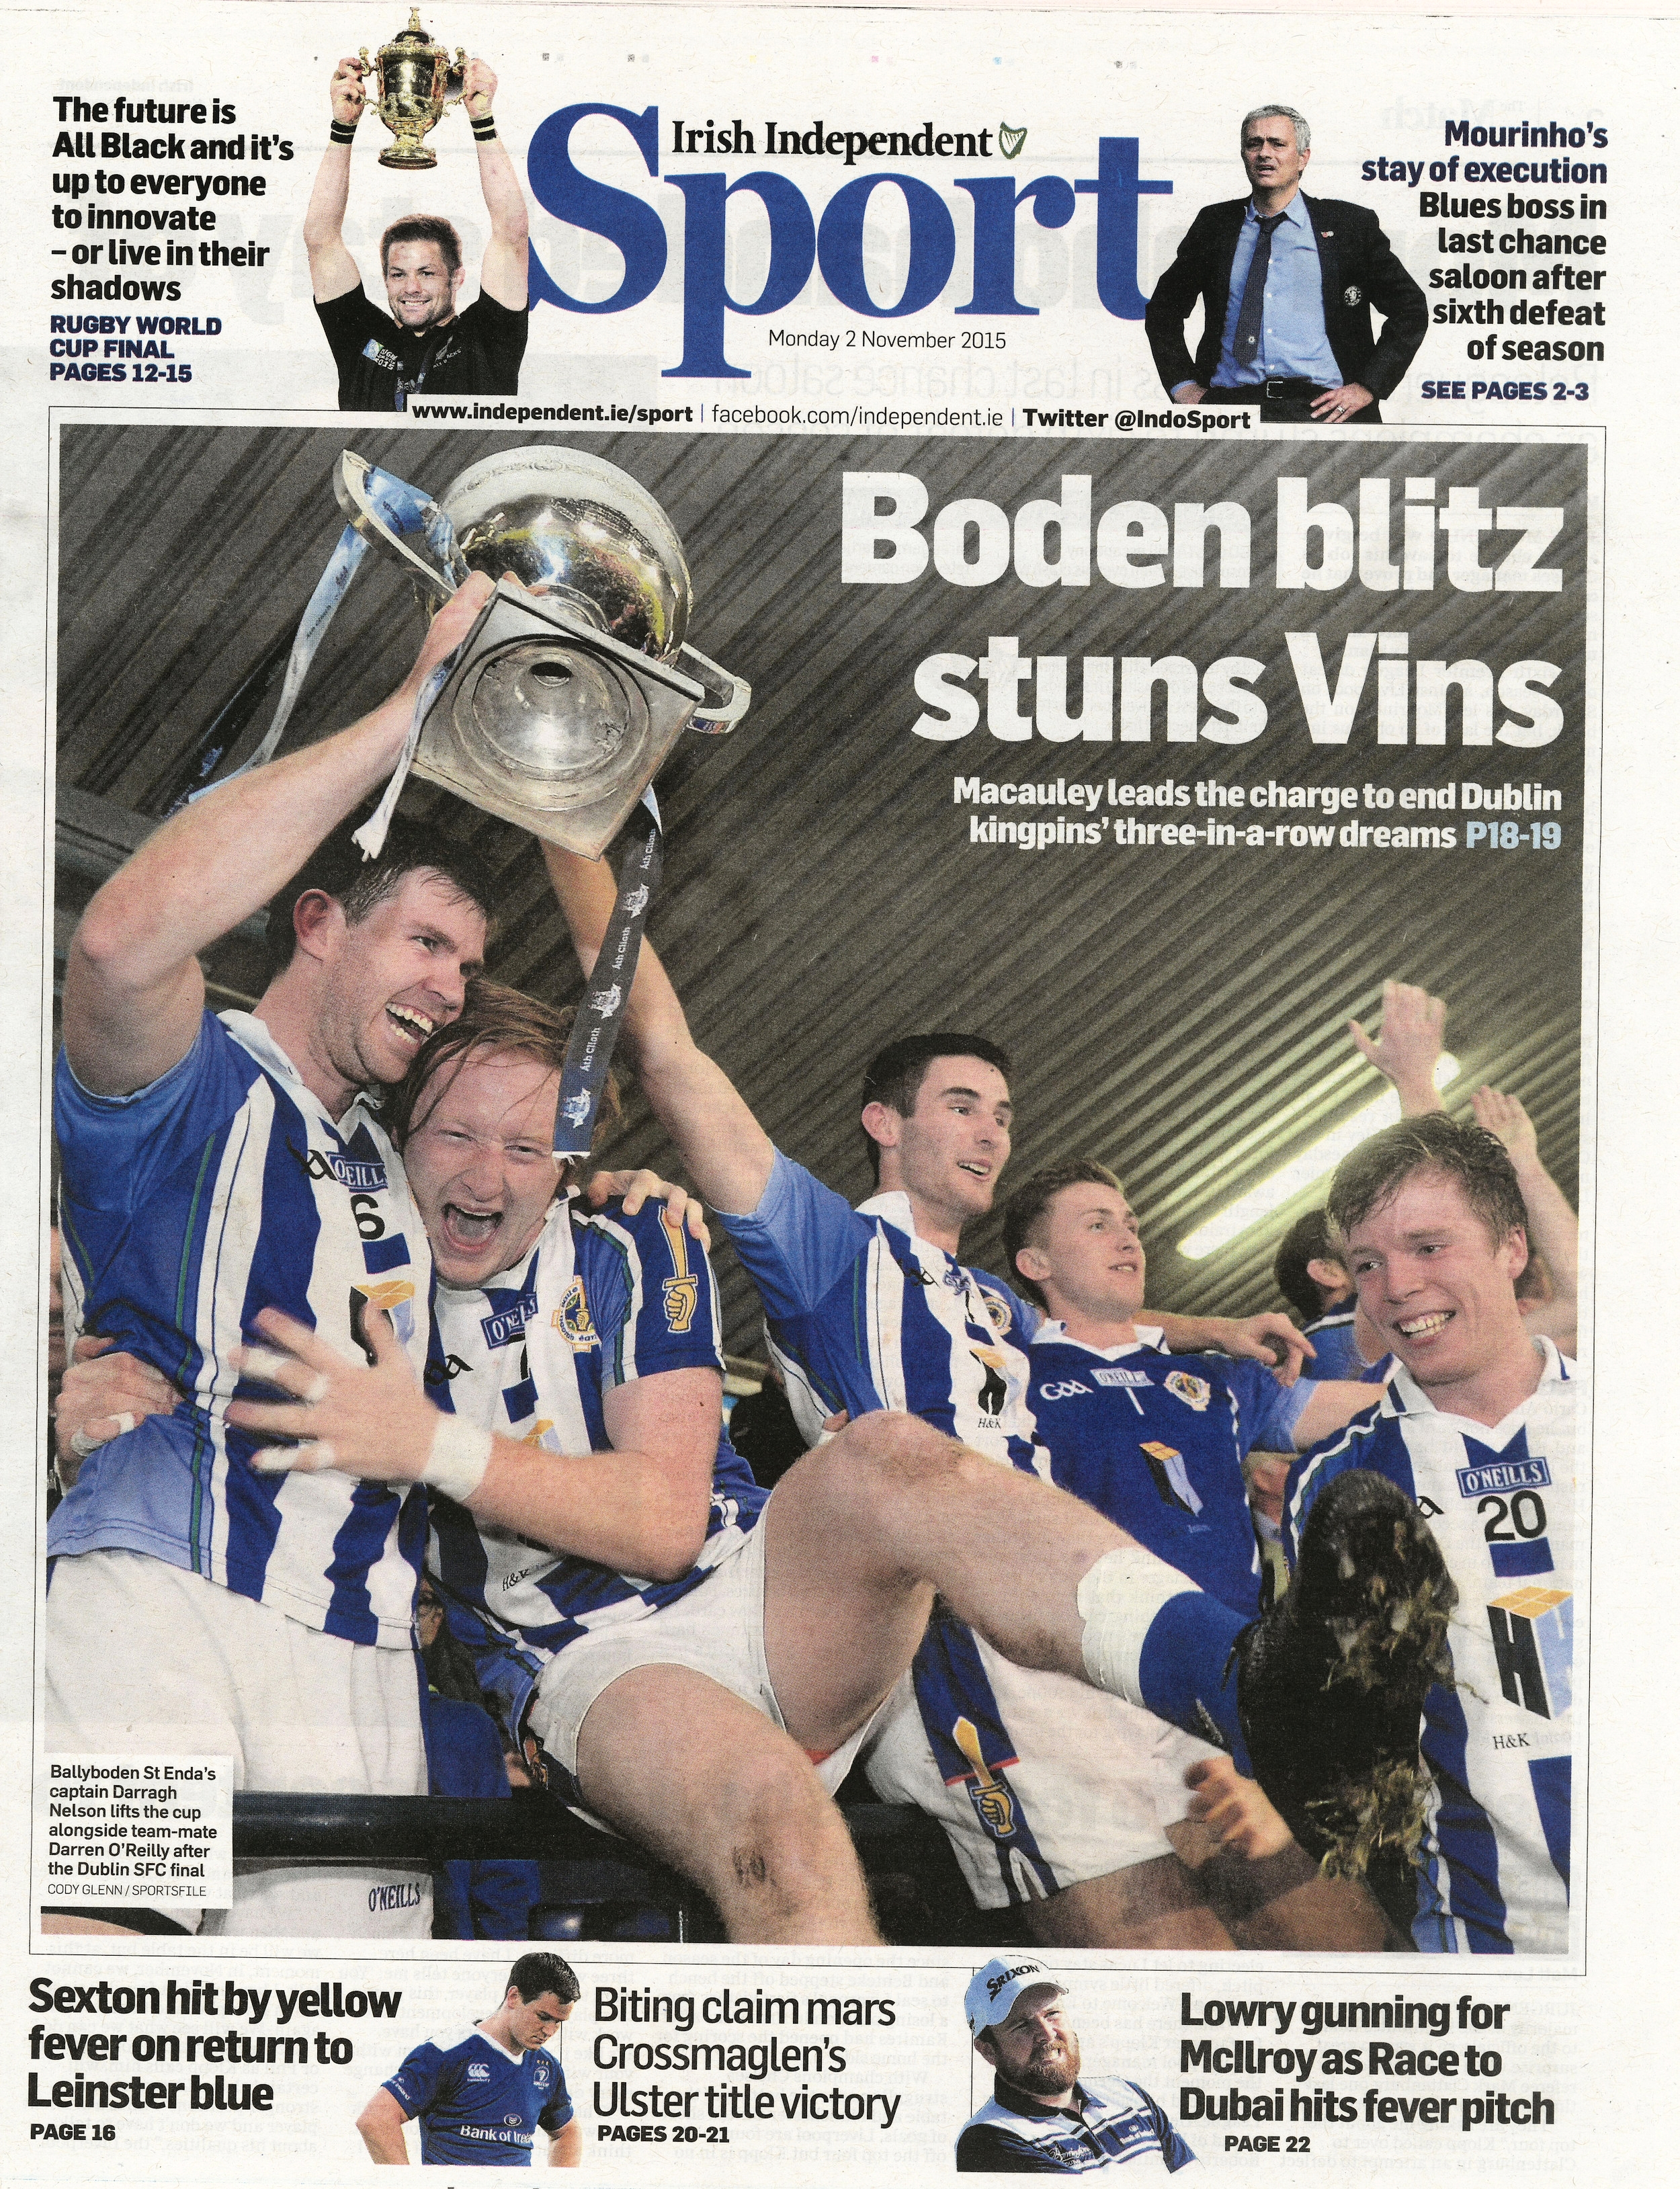  Ballyboden St. Enda's celebrate after defeating St. Vincent's to win the Leinster GAA Football Championship at Parnell Park February 7 2015  Irish Independent  